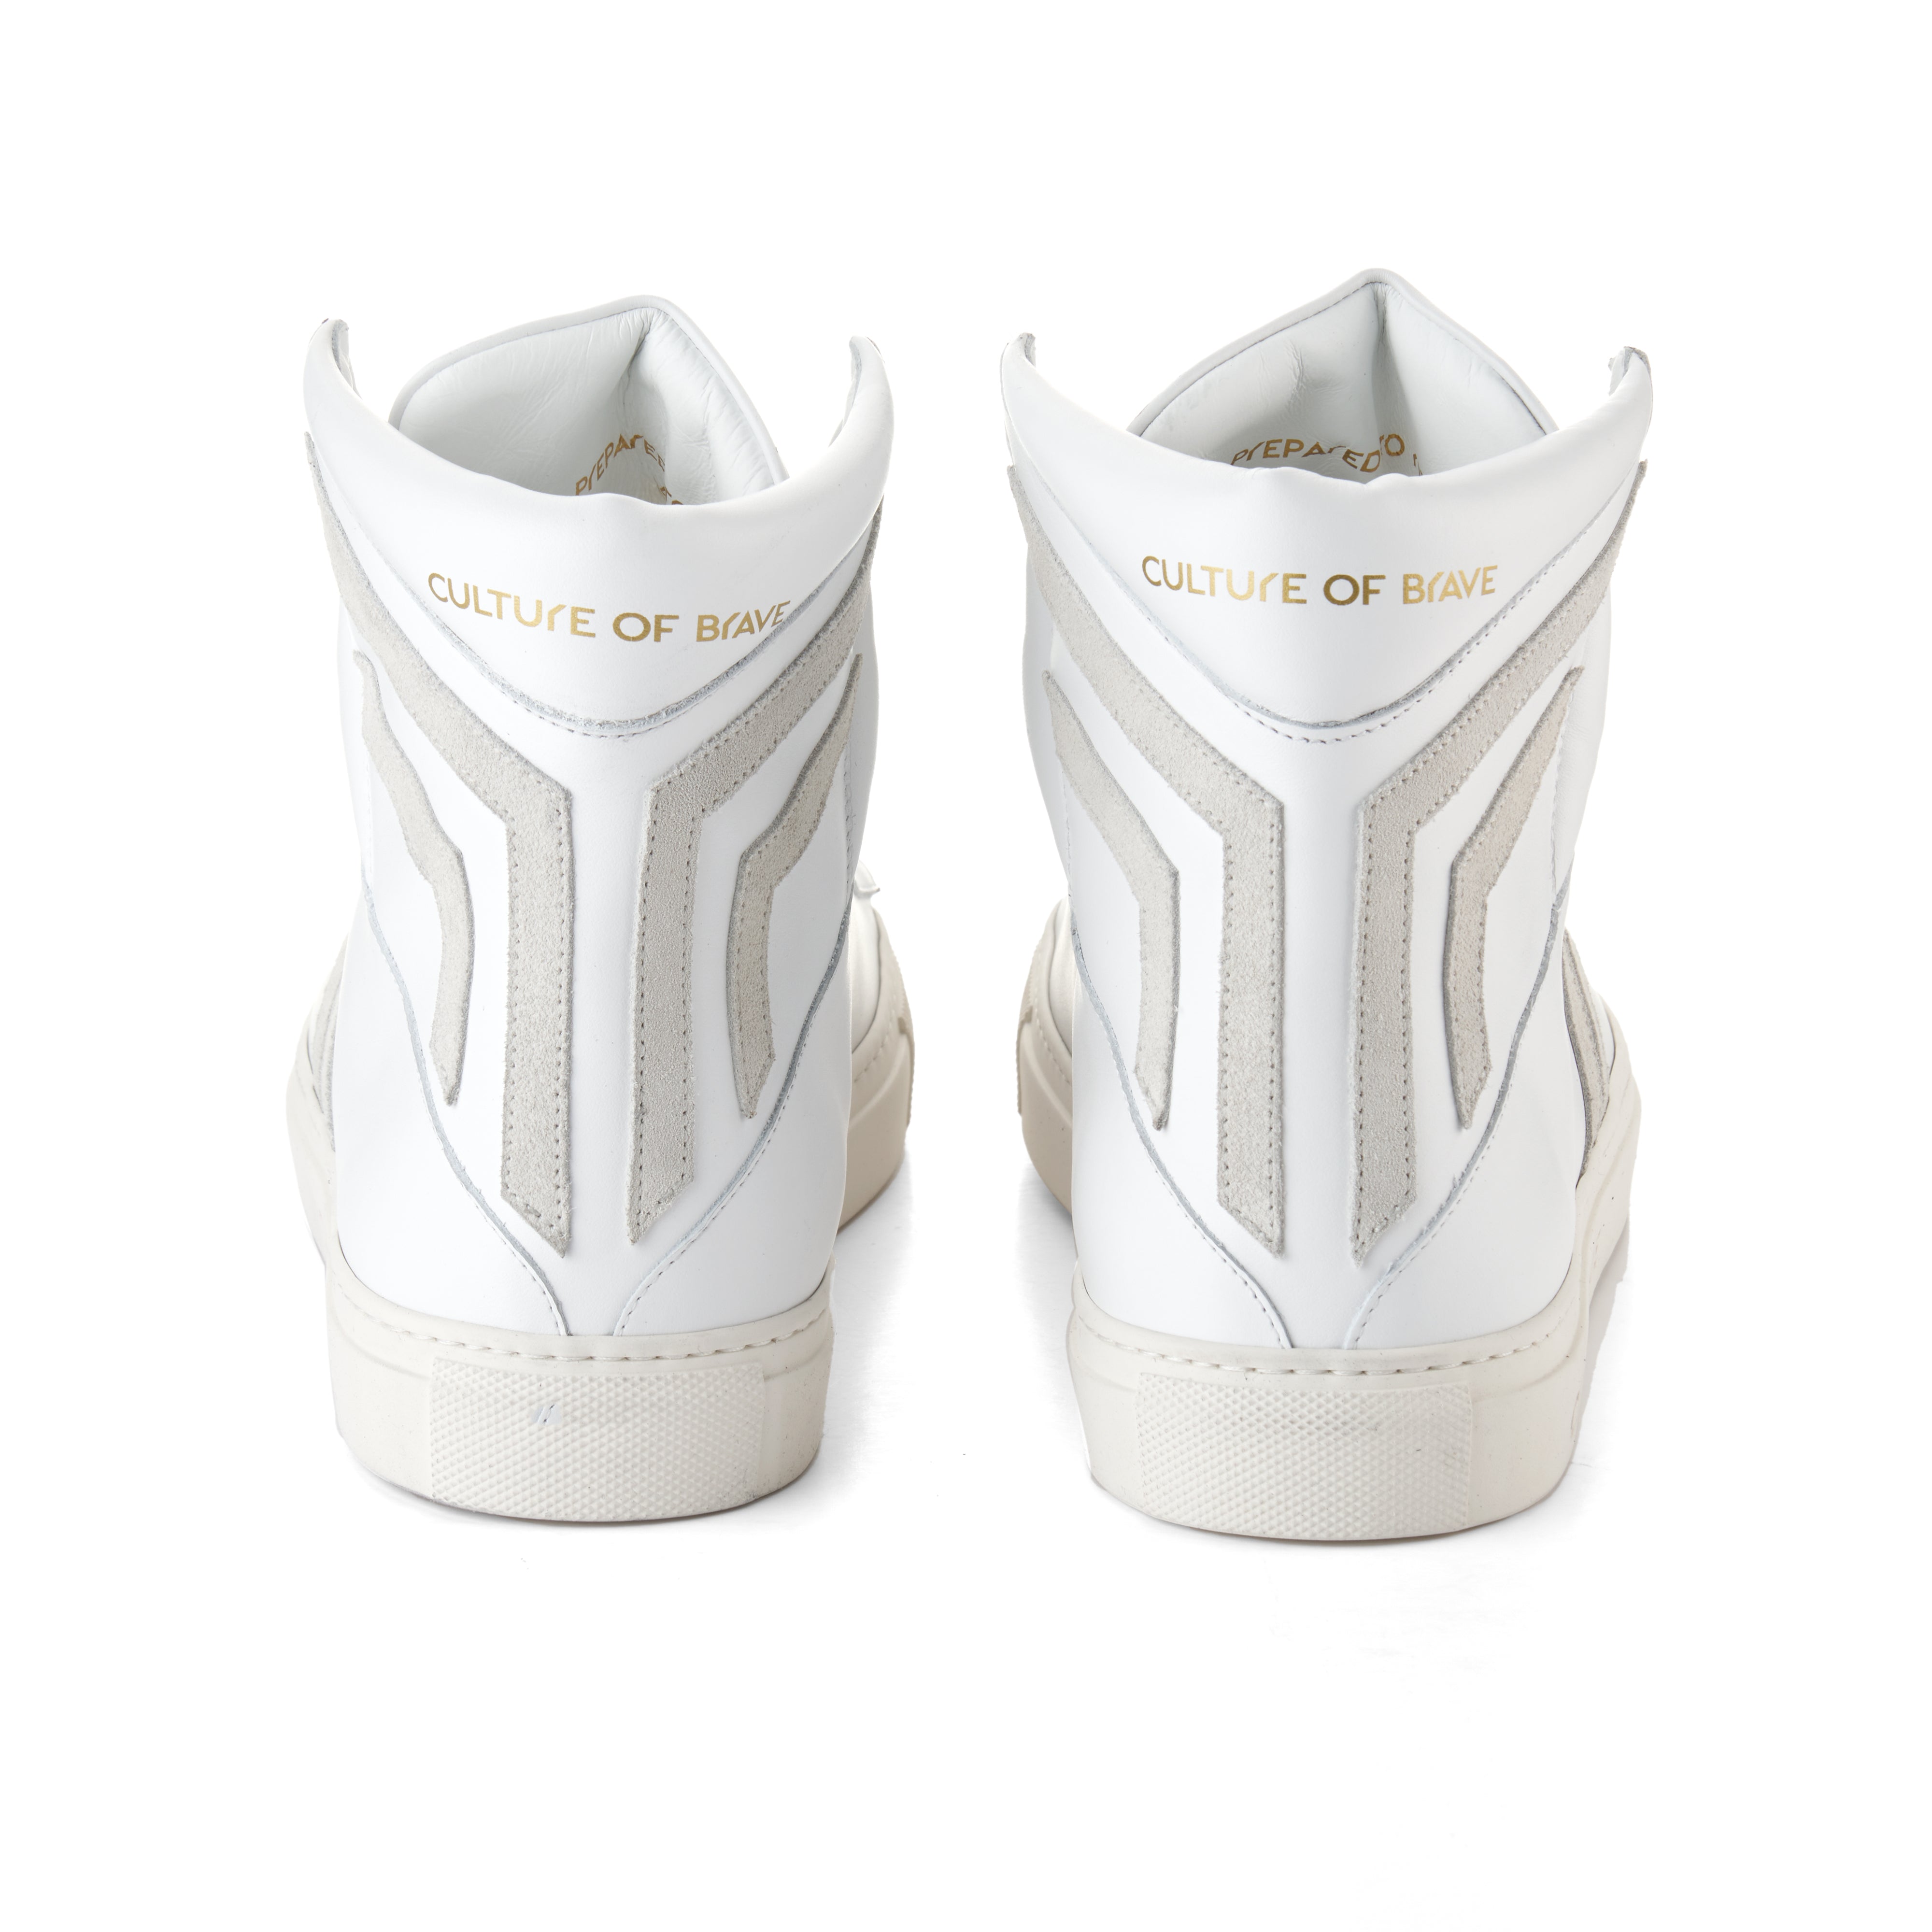 Prepared to Risk S21 Men White leather offwhite wing high cut